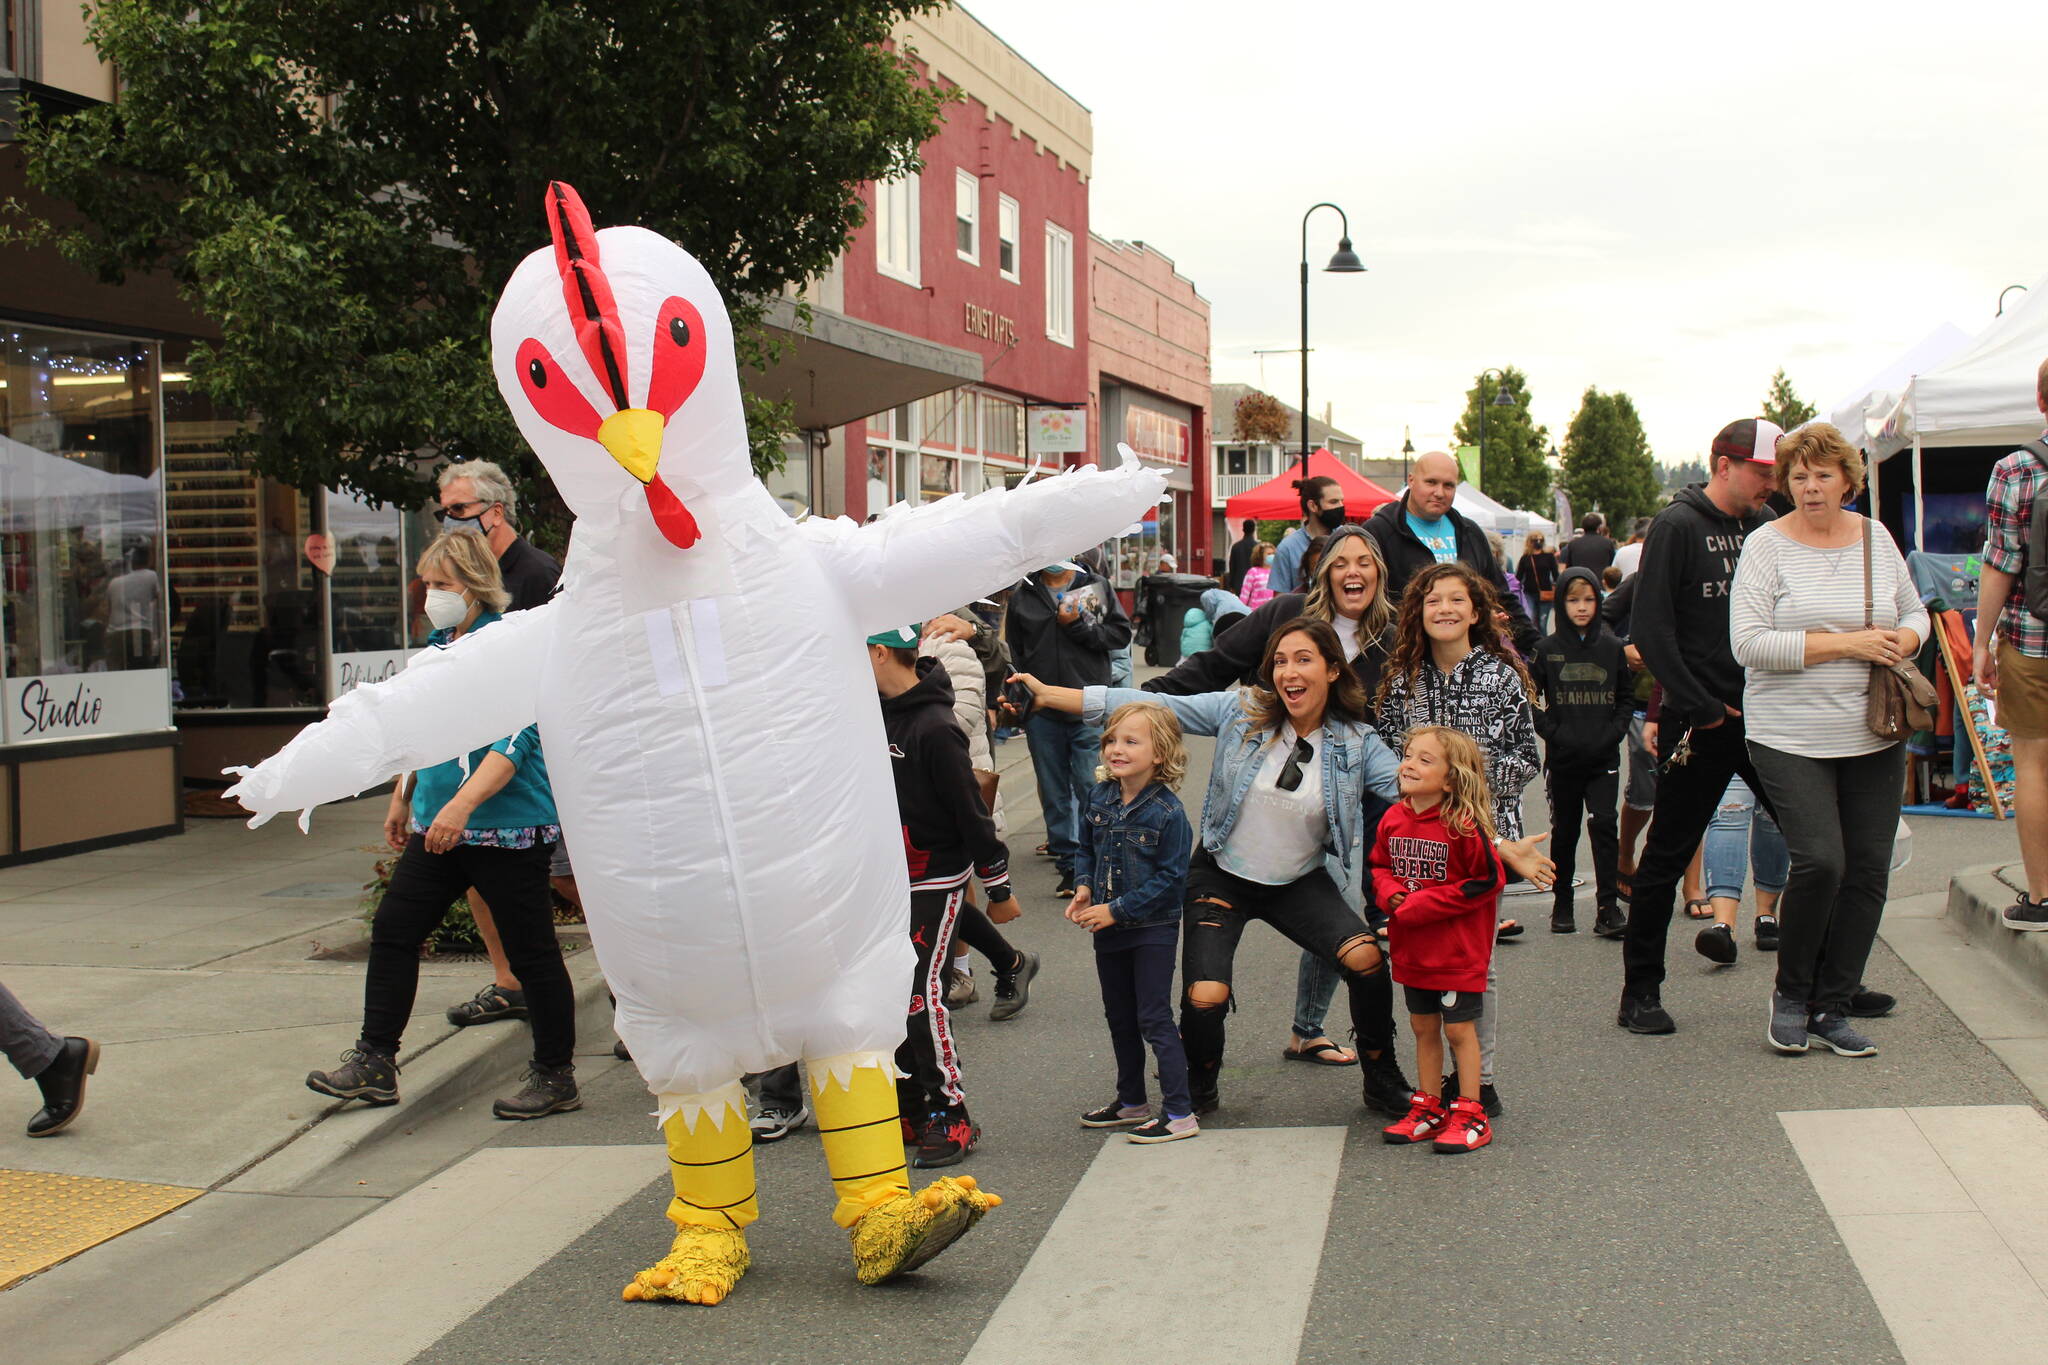 Harbor’s famous chicken dances with the crowds at the Oak Harbor Music Festival Saturday. Ever the trendsetter, it appears a flock of fans have copied his signature pose while he struts about the town during the multi-day music festival. (Photo by Karina Andrew/Whidbey News-Times)